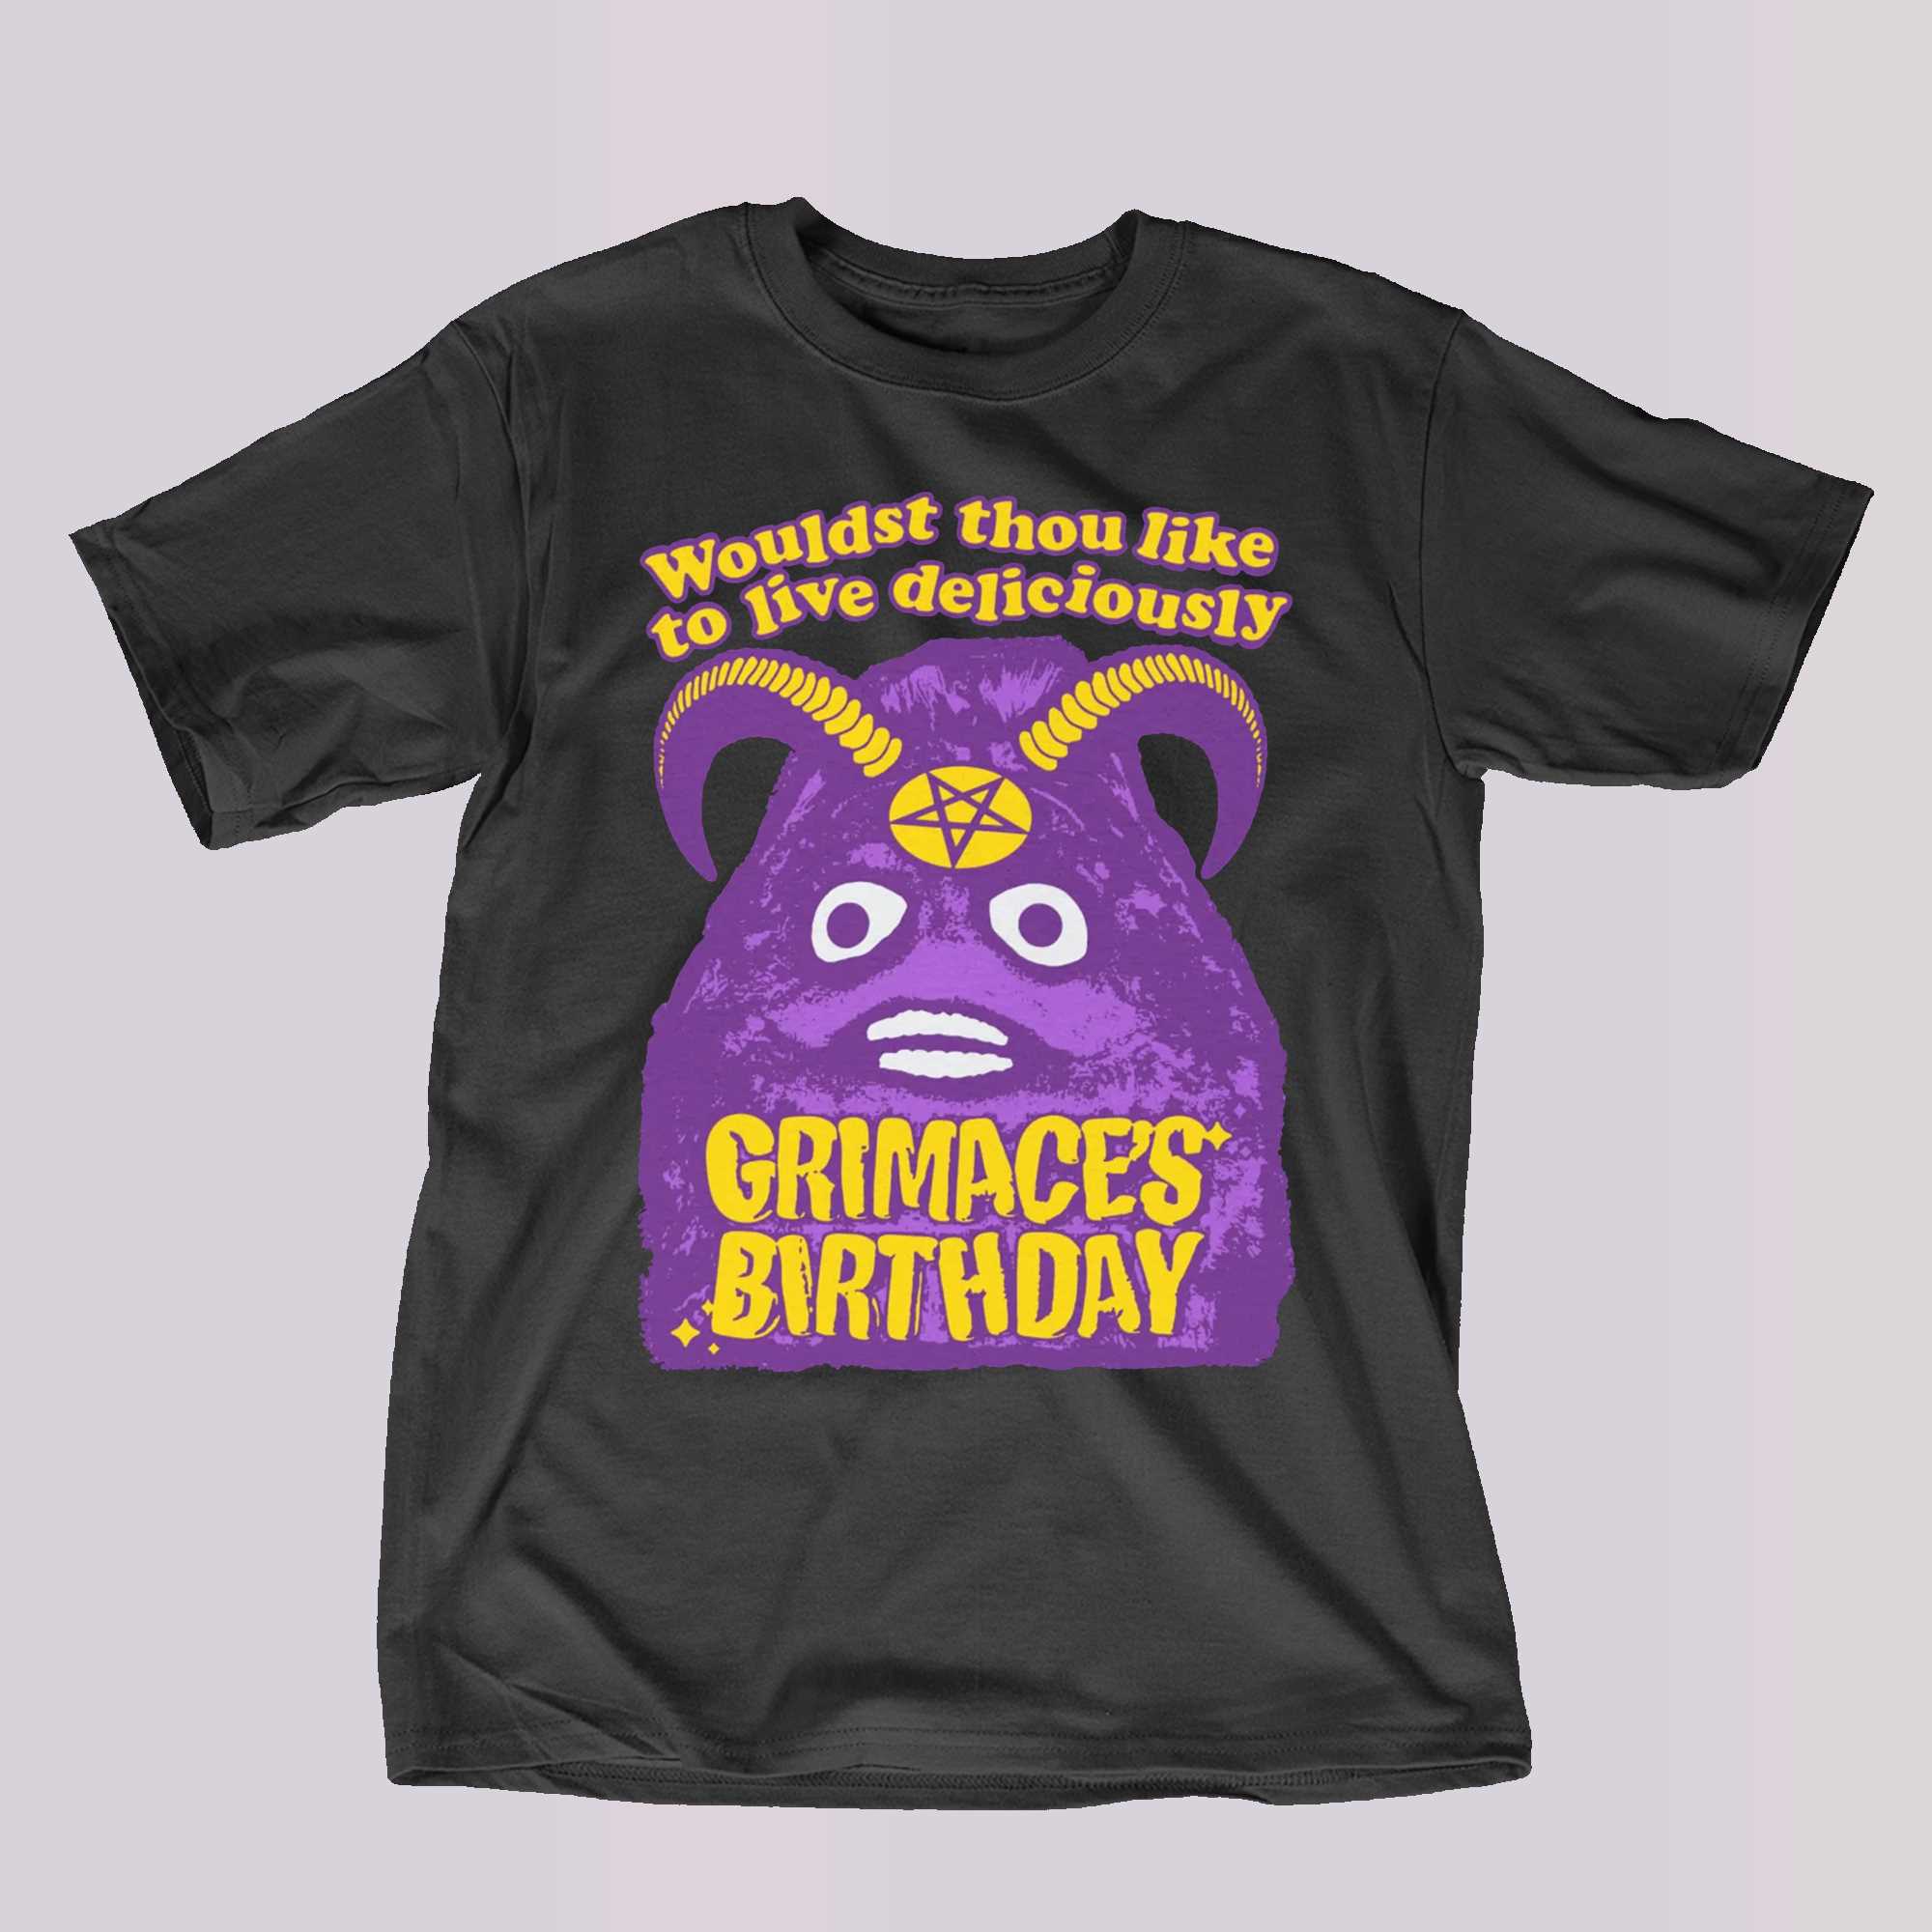 grimaces birthday wouldst thou like to live deliciously shirt 1